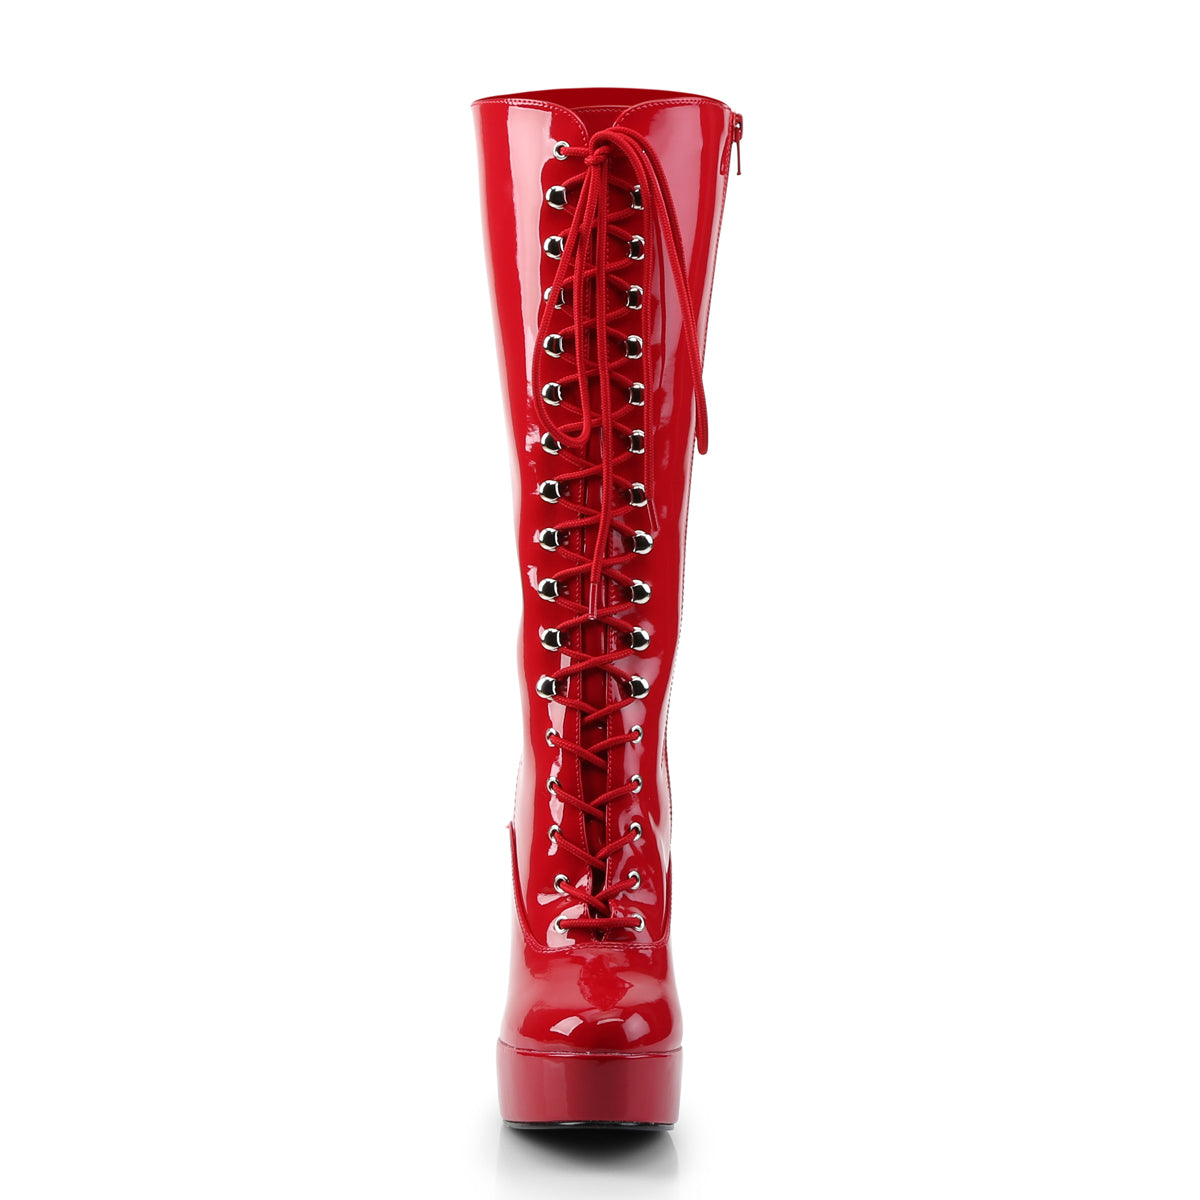 Pleaser Womens Boots ELECTRA-2020 Red Pat